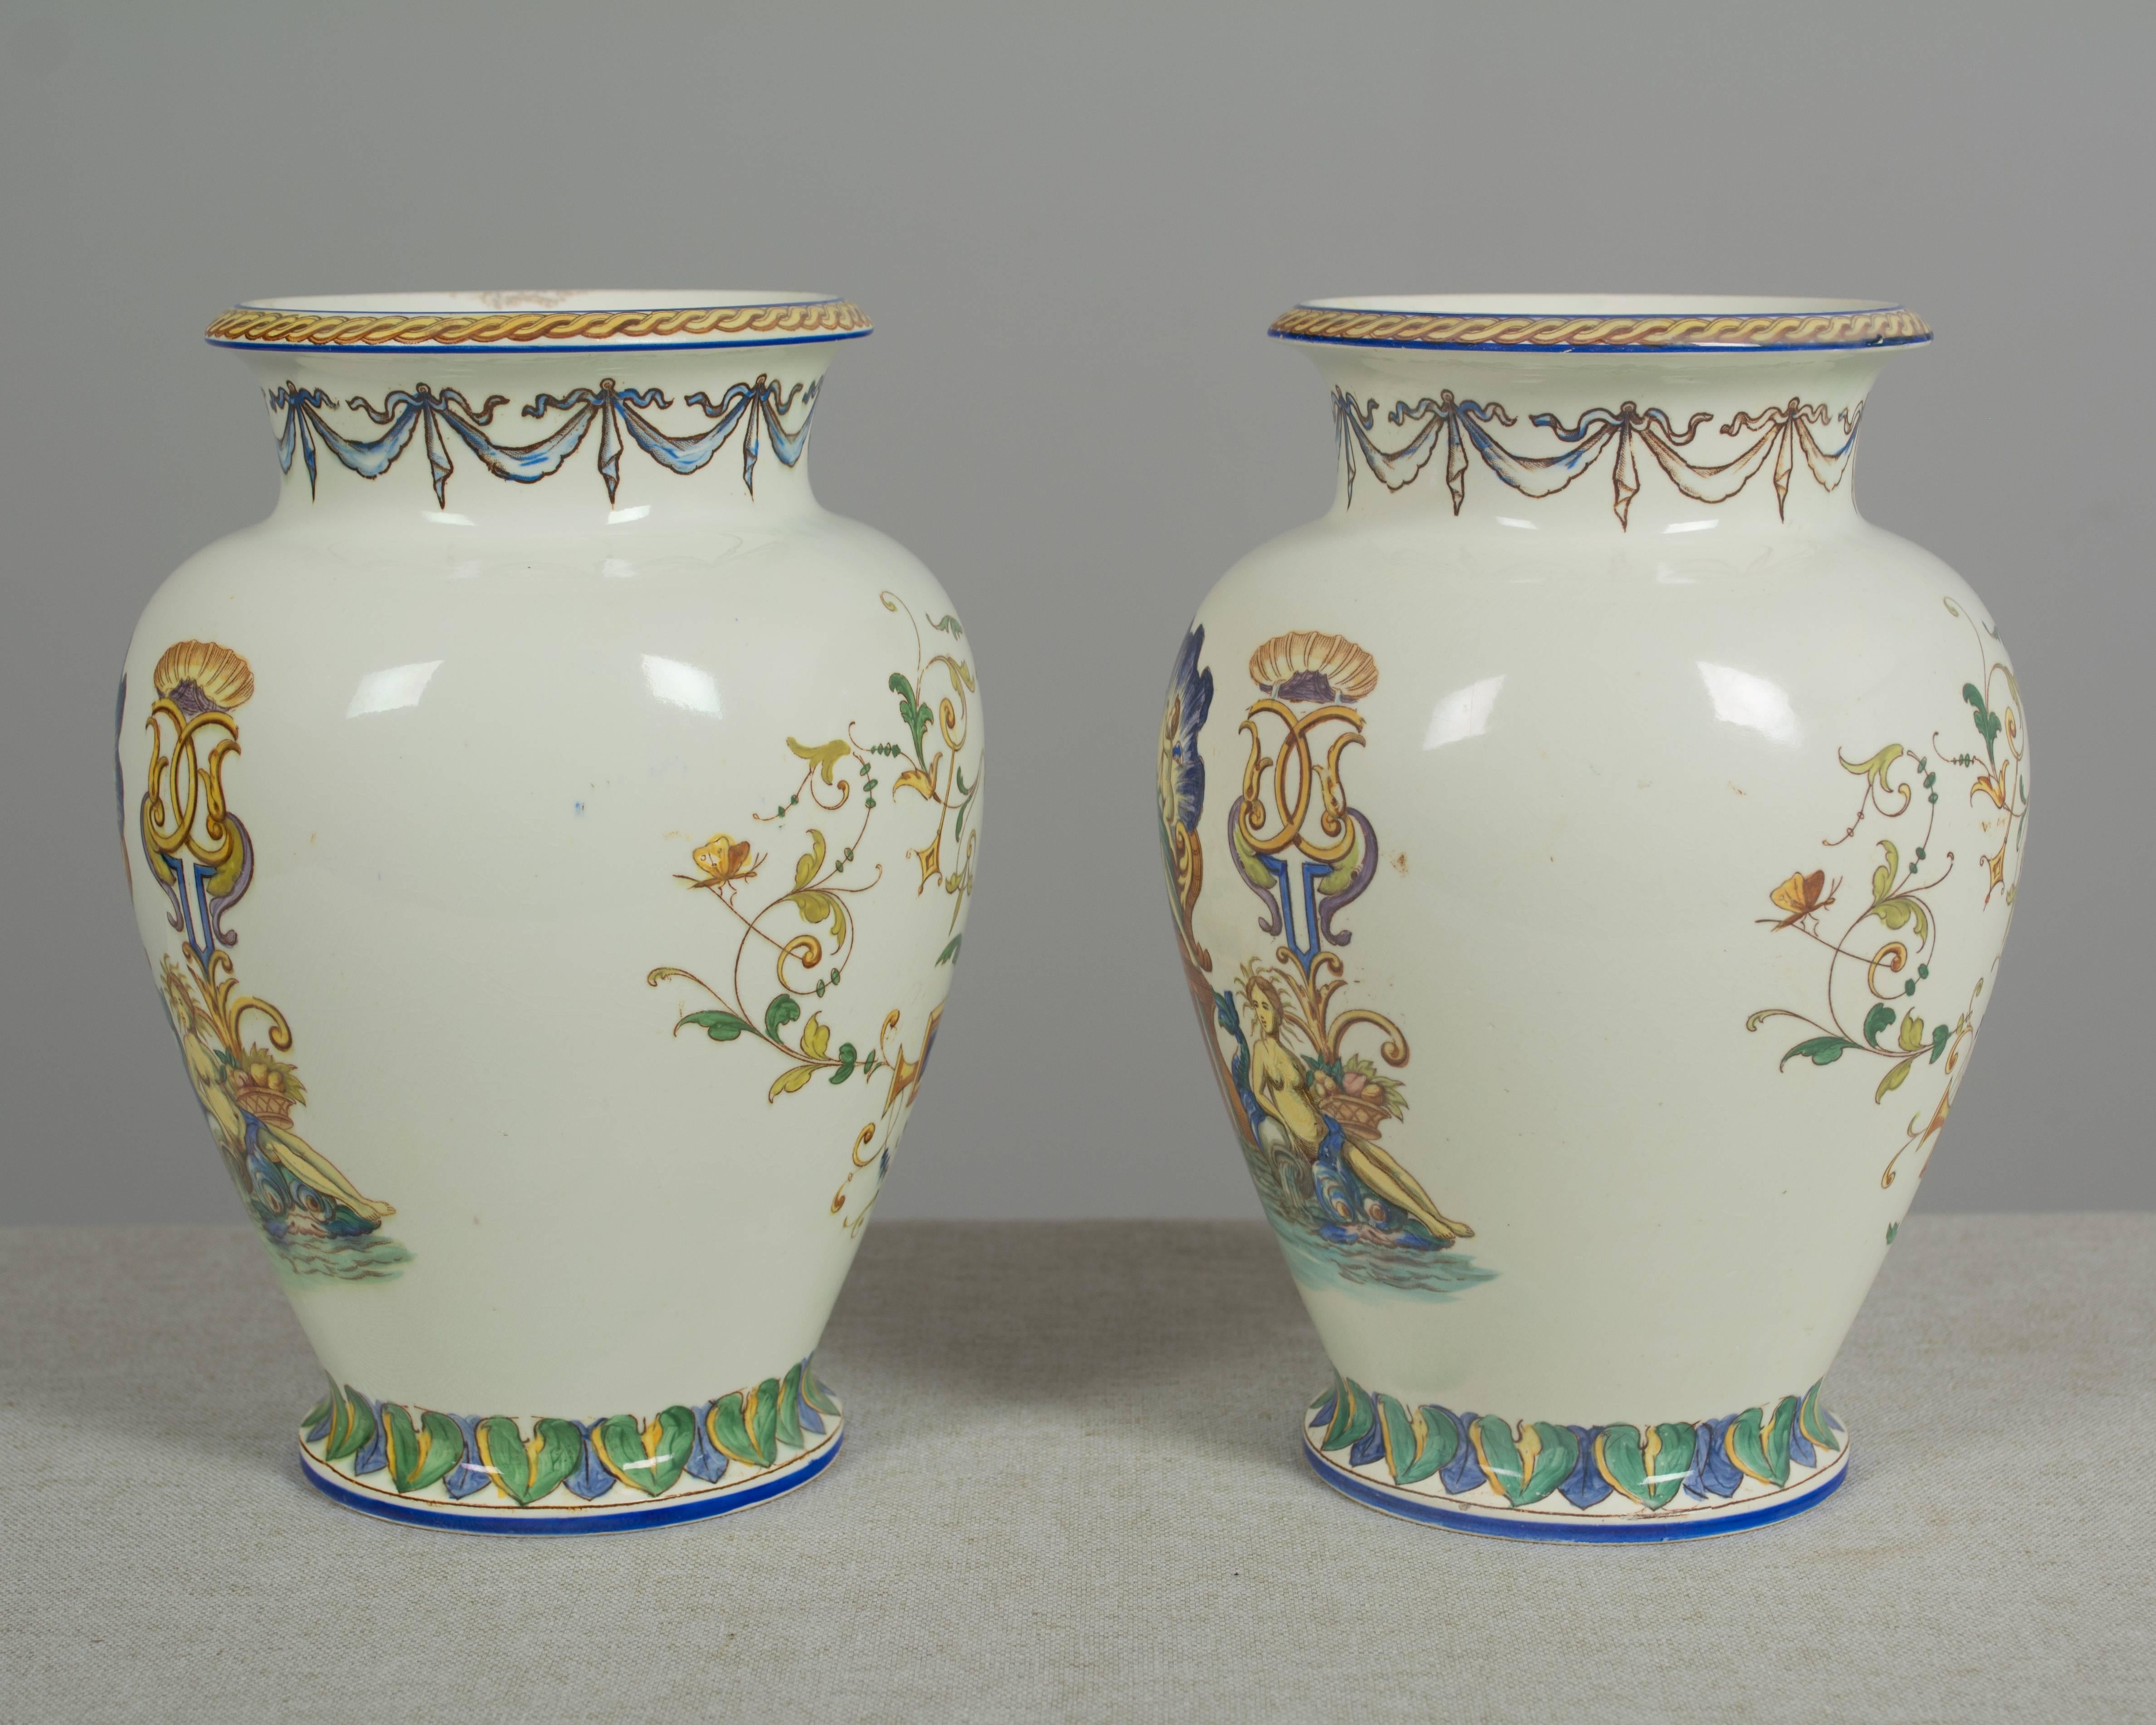 Pair of 19th century French faience vases by Jules Vieillard of Bordeaux. Italian Renaissance style decoration depicting Venus. Mint condition. Mark to underside: JVB. Please refer to photos for more details. We have a large selection of French